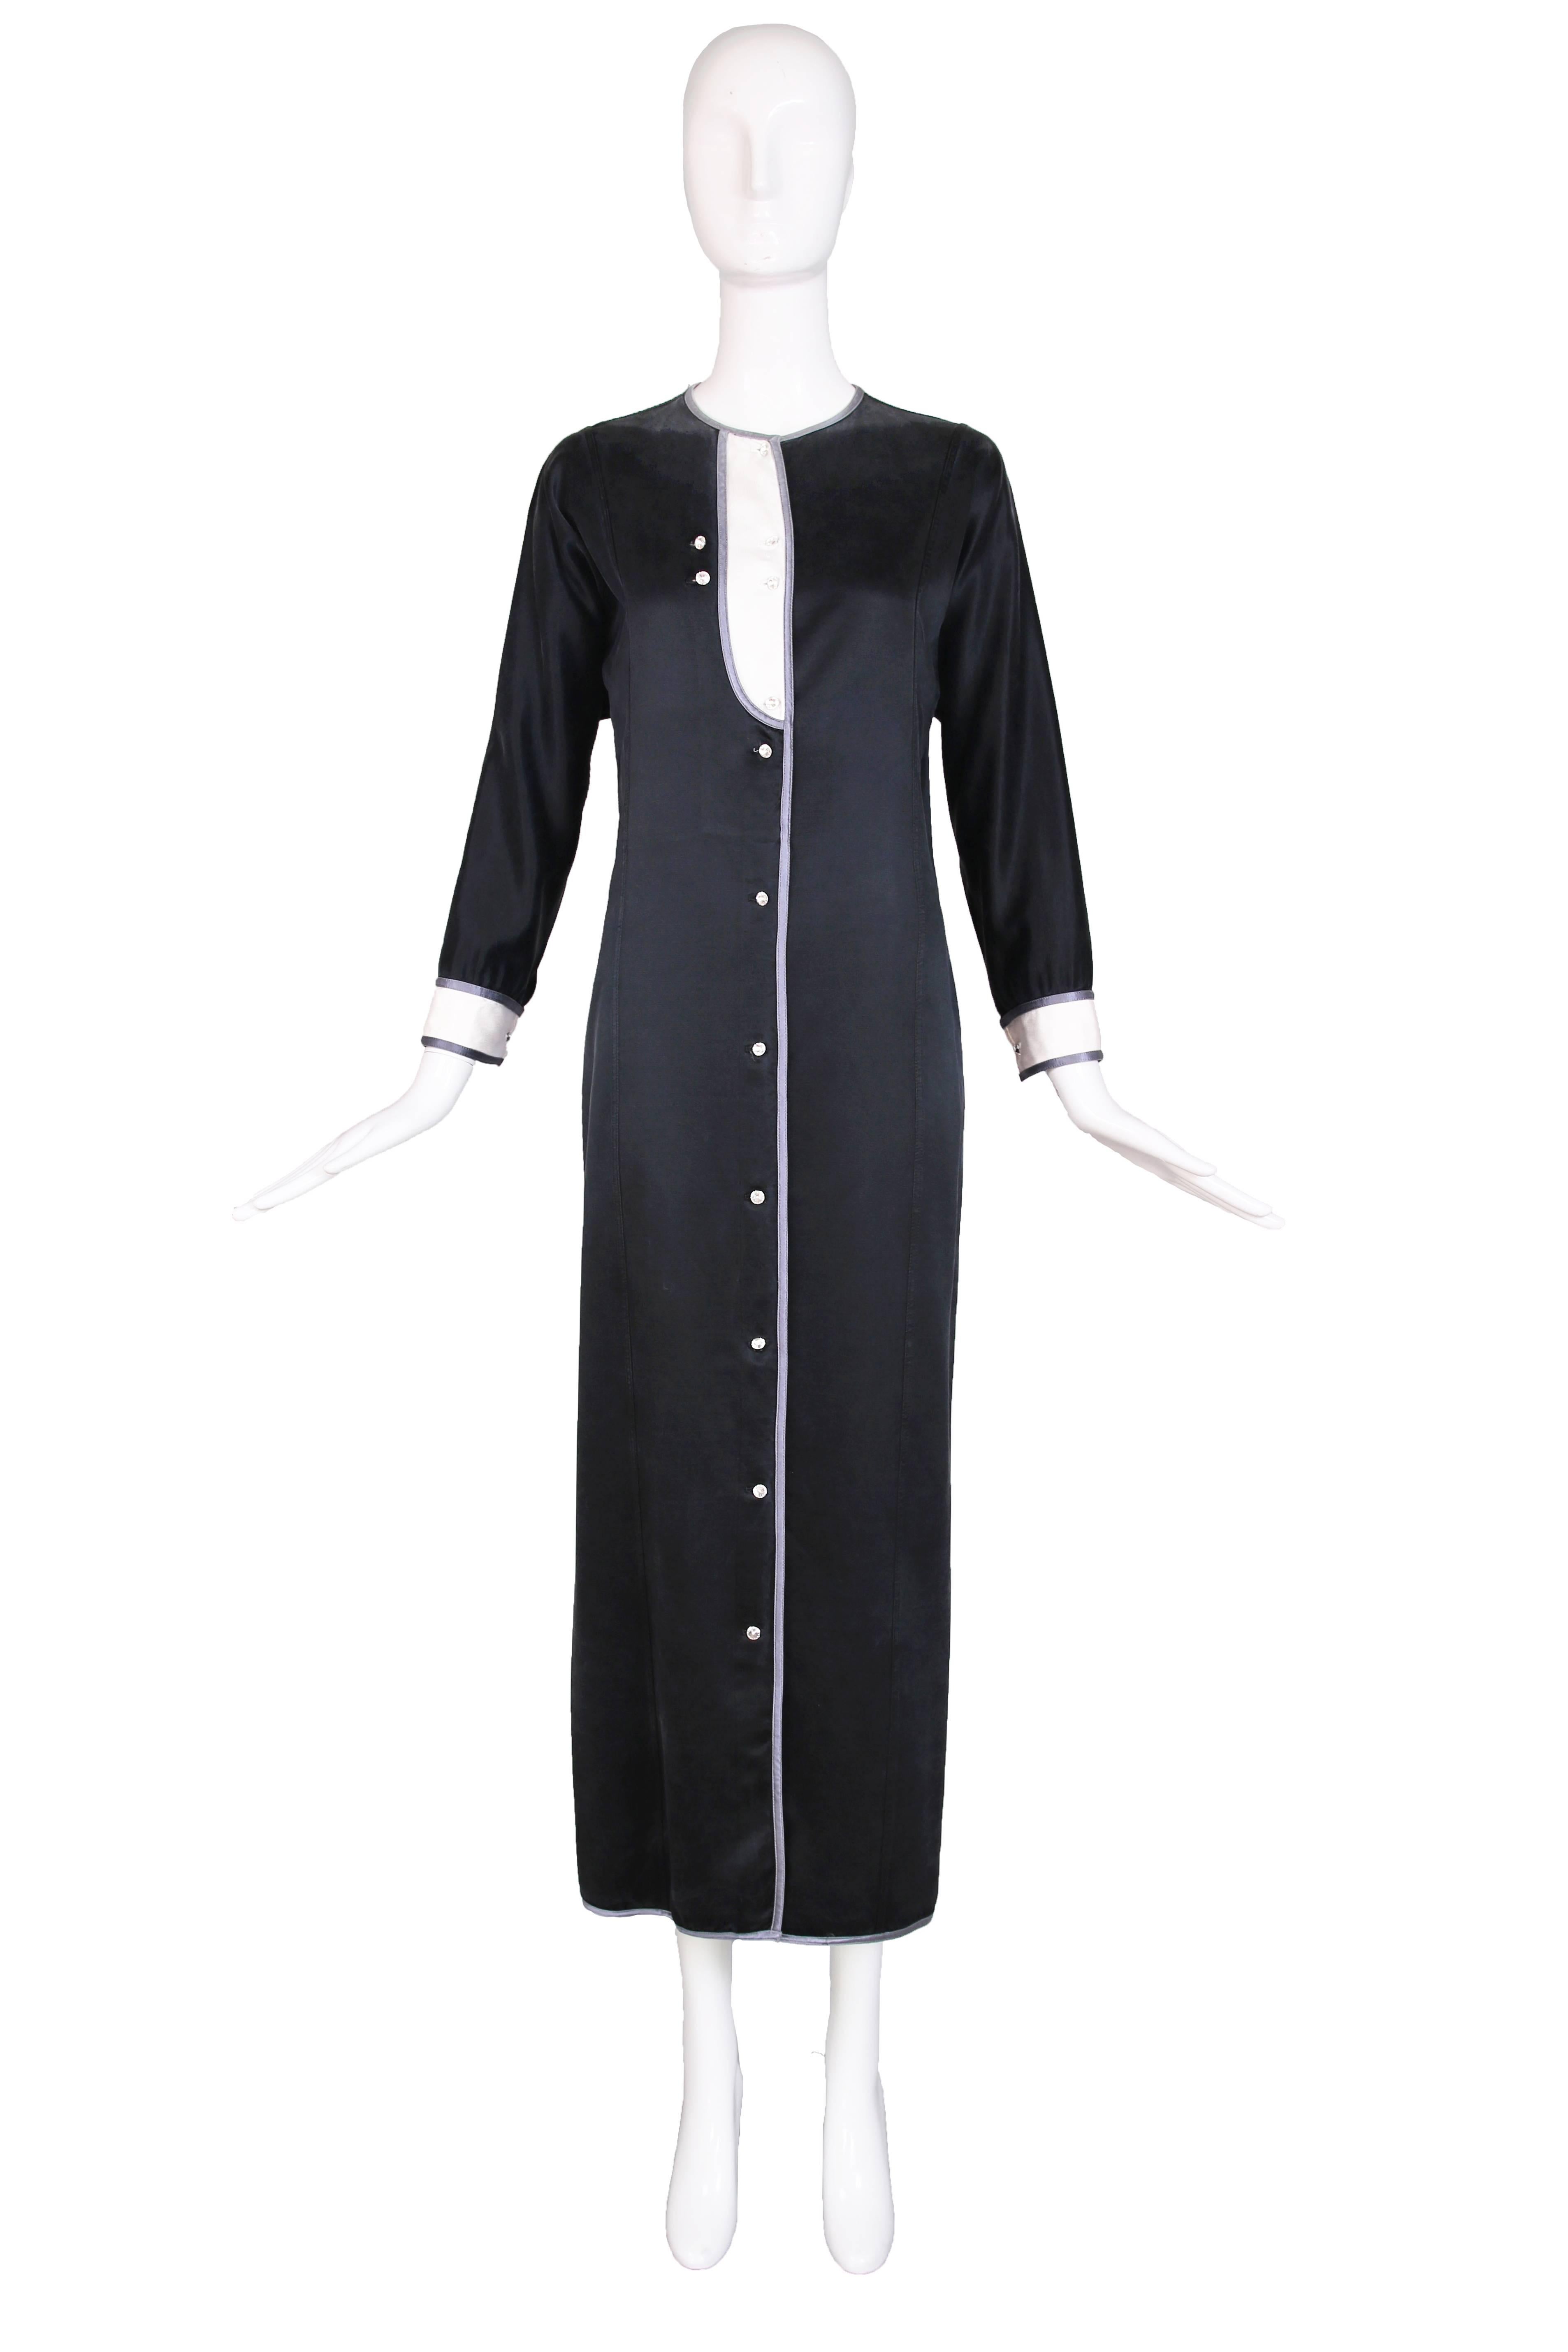 1970's Geoffrey Beene satin tuxedo dress with crystal buttons down the front and at the cuffs and silver satin trim. In excellent condition. No size tag, please consult measurements.
MEASUREMENTS:
Bust - 38